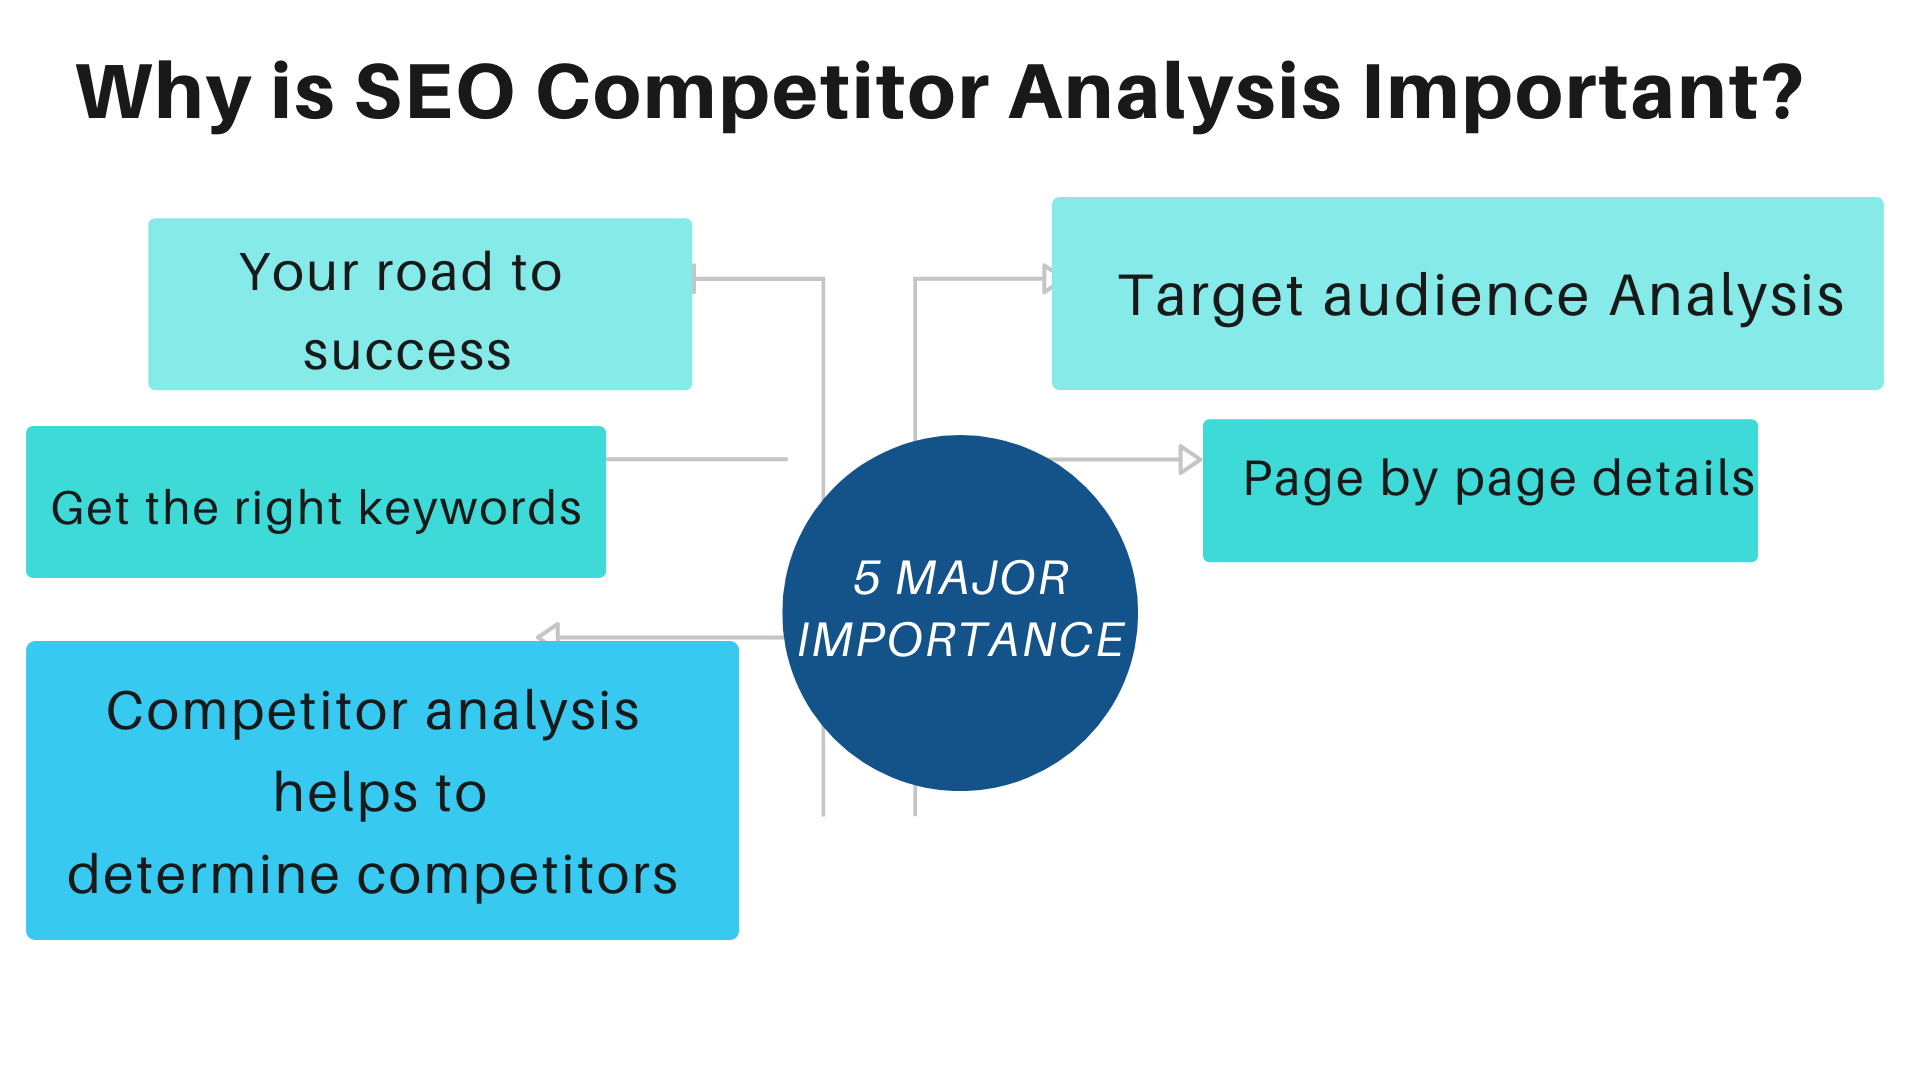 SEO Competitor Analysis Importance